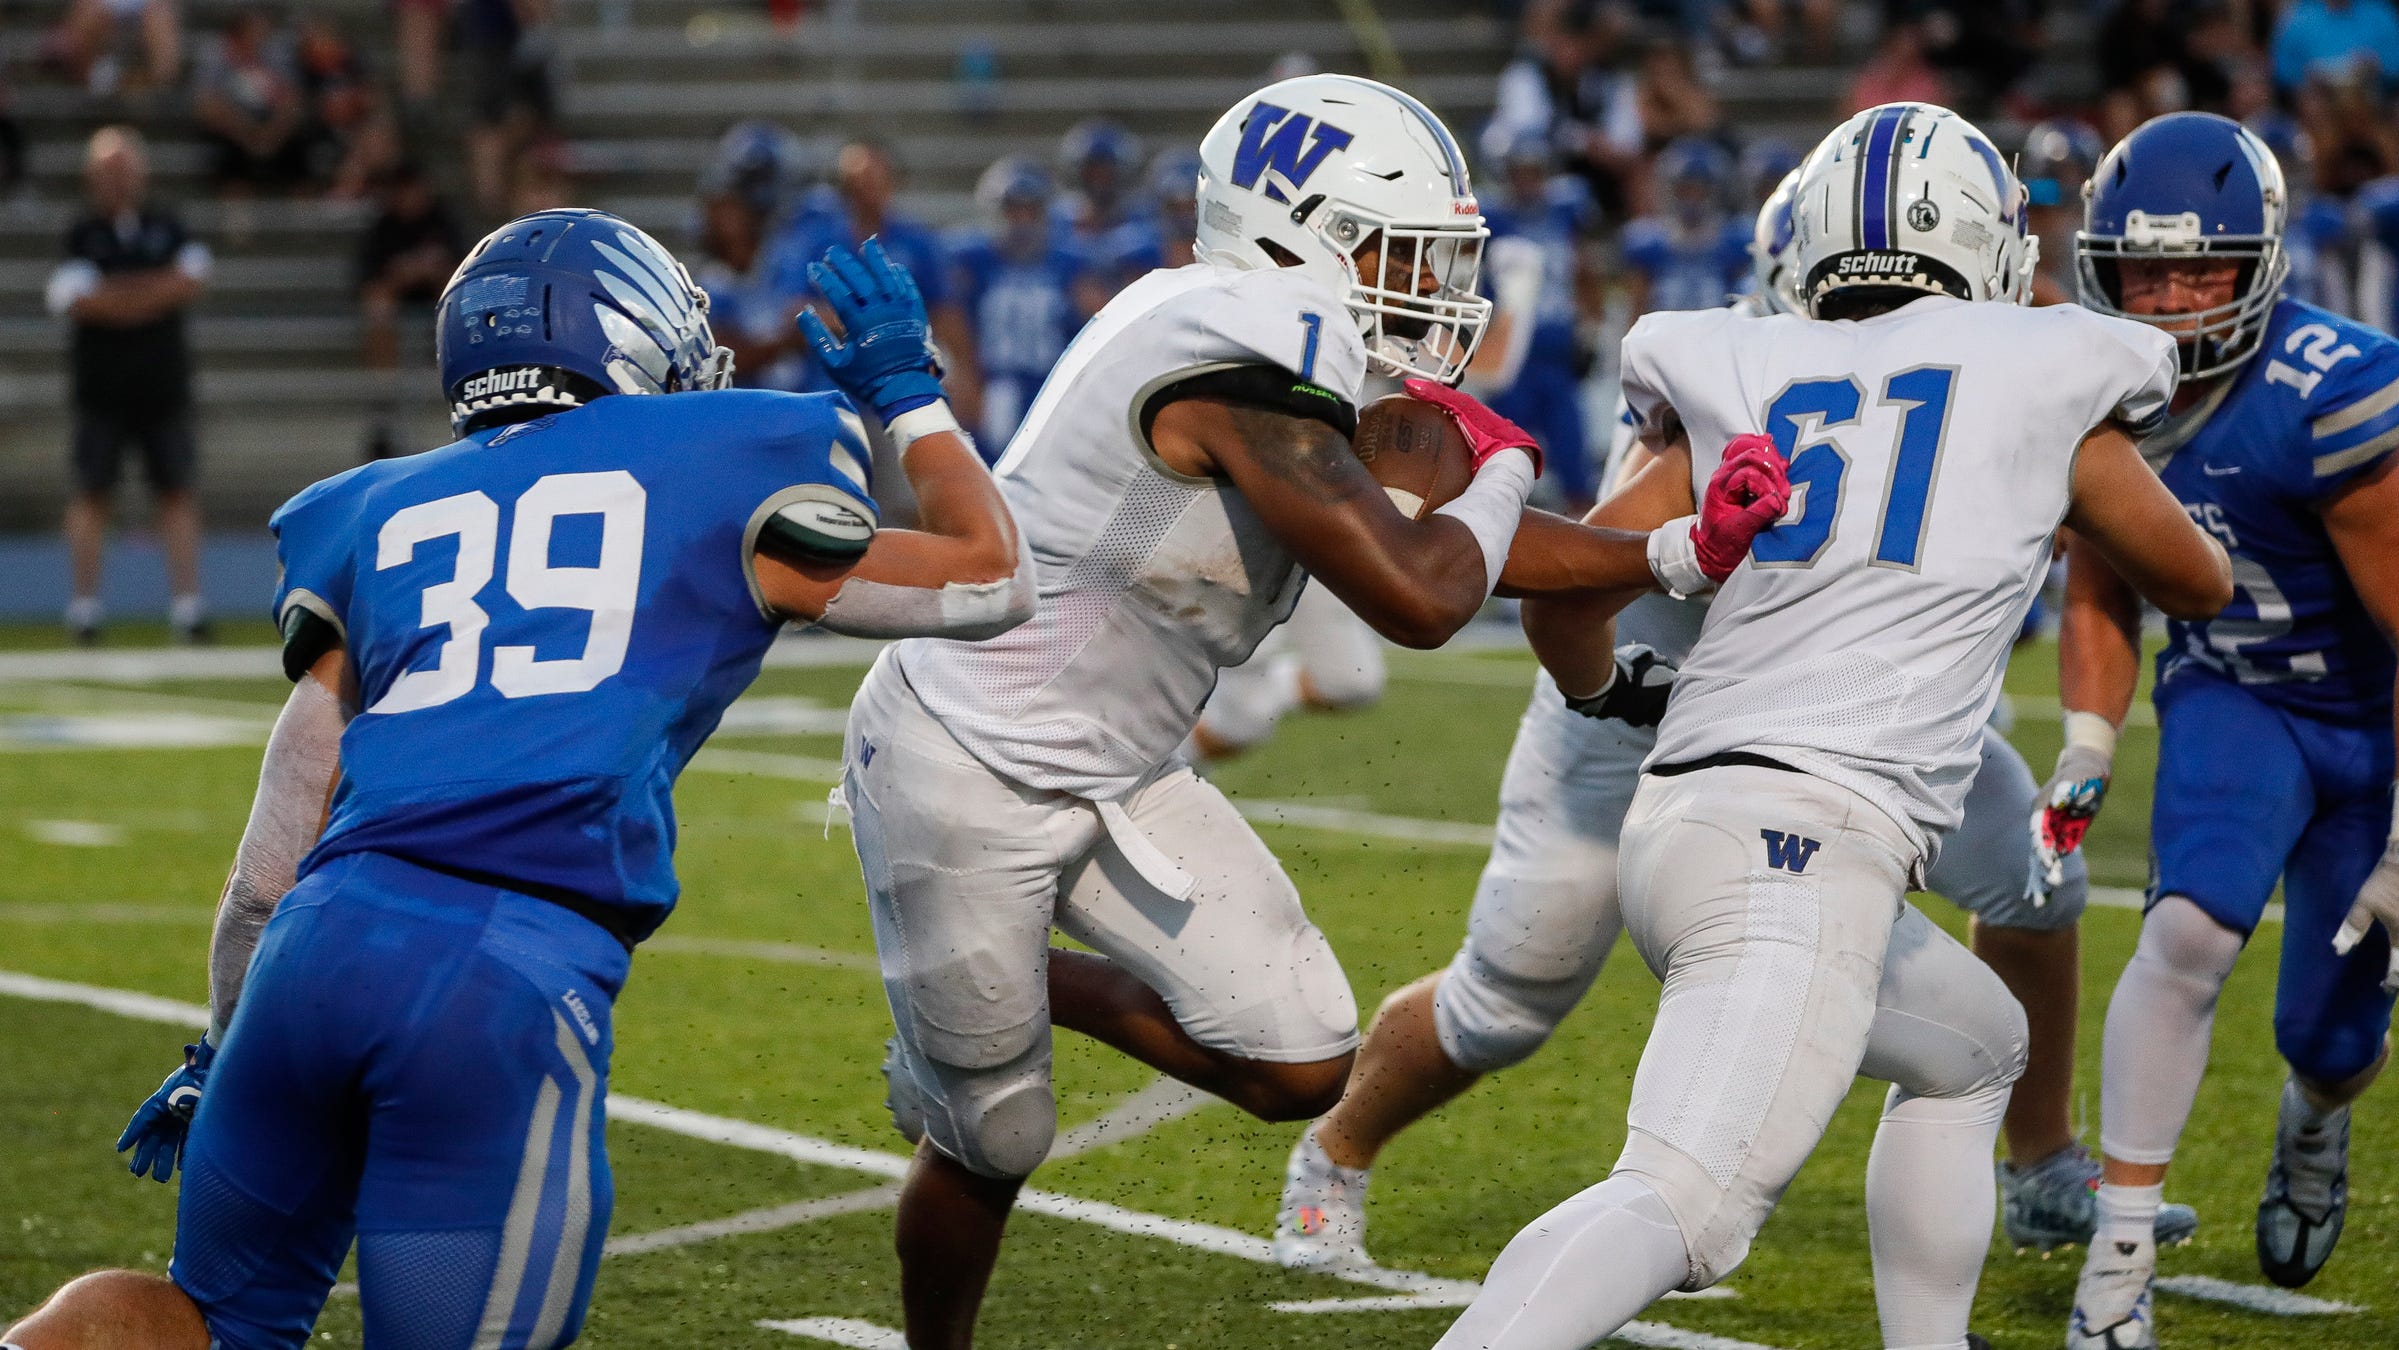 Michigan high school football: Walled Lake Western's offense too much for Lakeland, 52-7